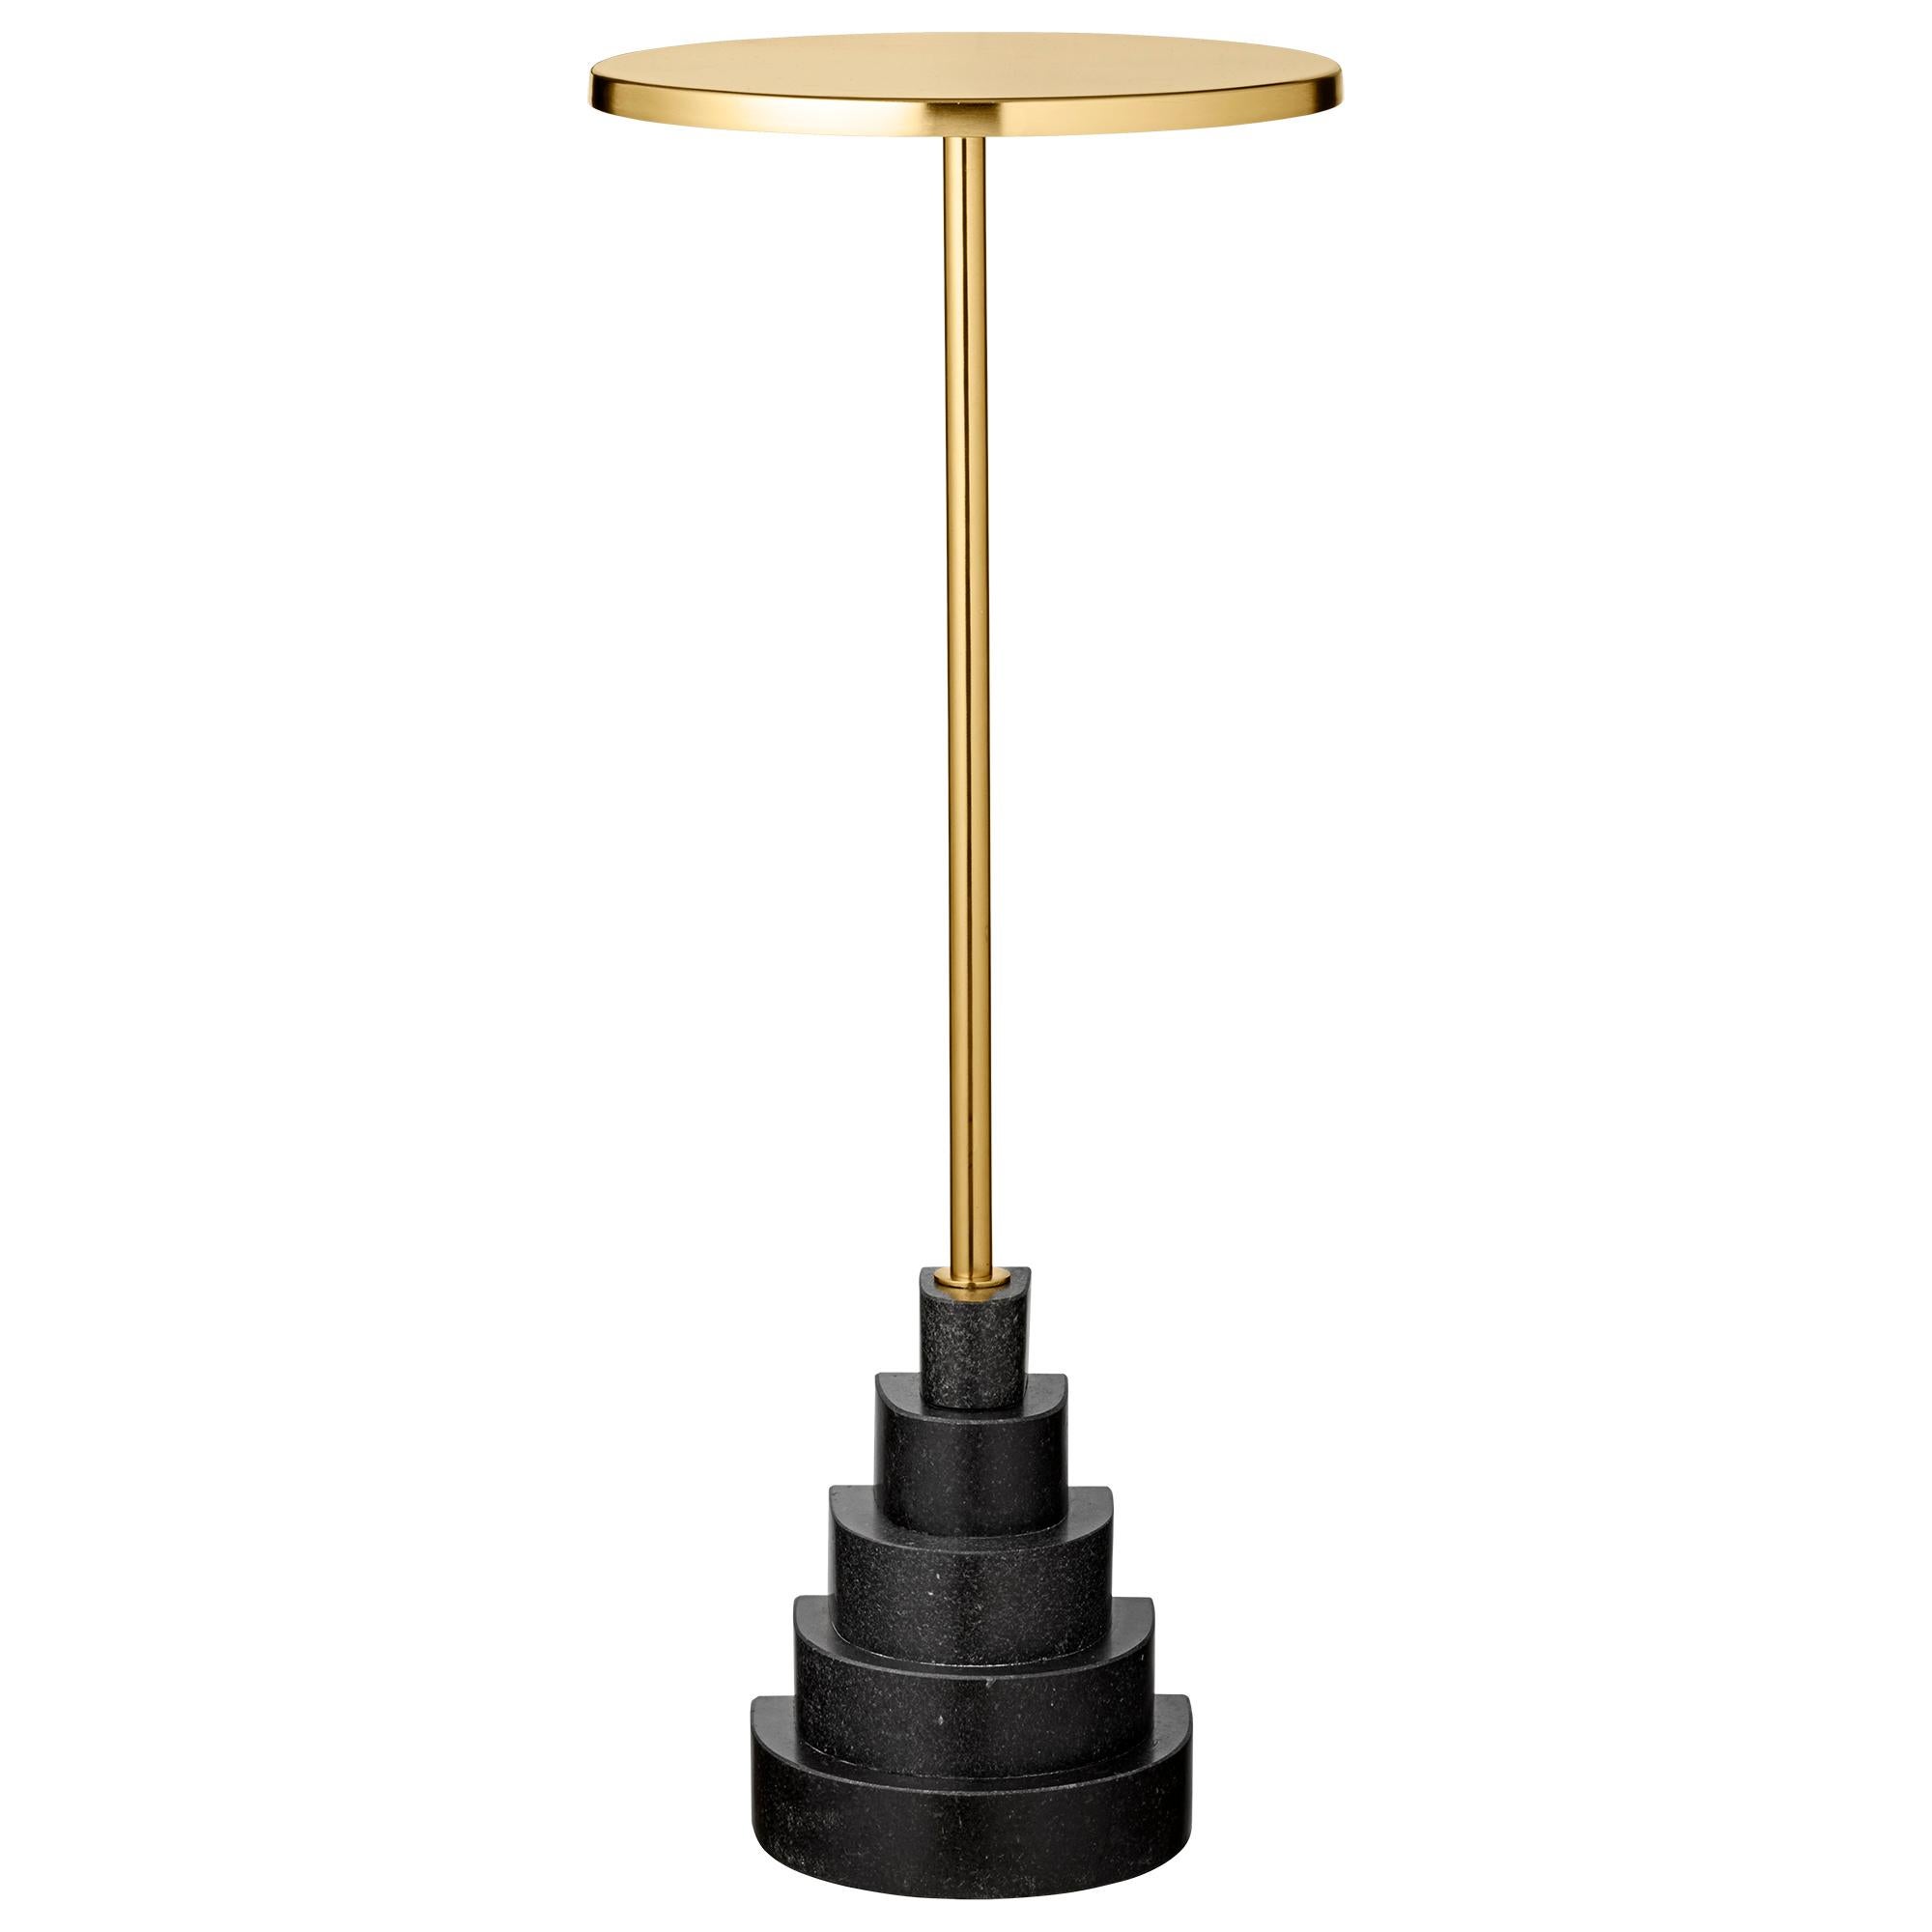 Granite and steel gold side table
Dimensions: Ø 32 x H 78 cm
Materials: Steel, granite base

The unique shape will make them stand out in any room in the home and truly appear as pieces of art. The tables are made of a foot in marble or granite in a